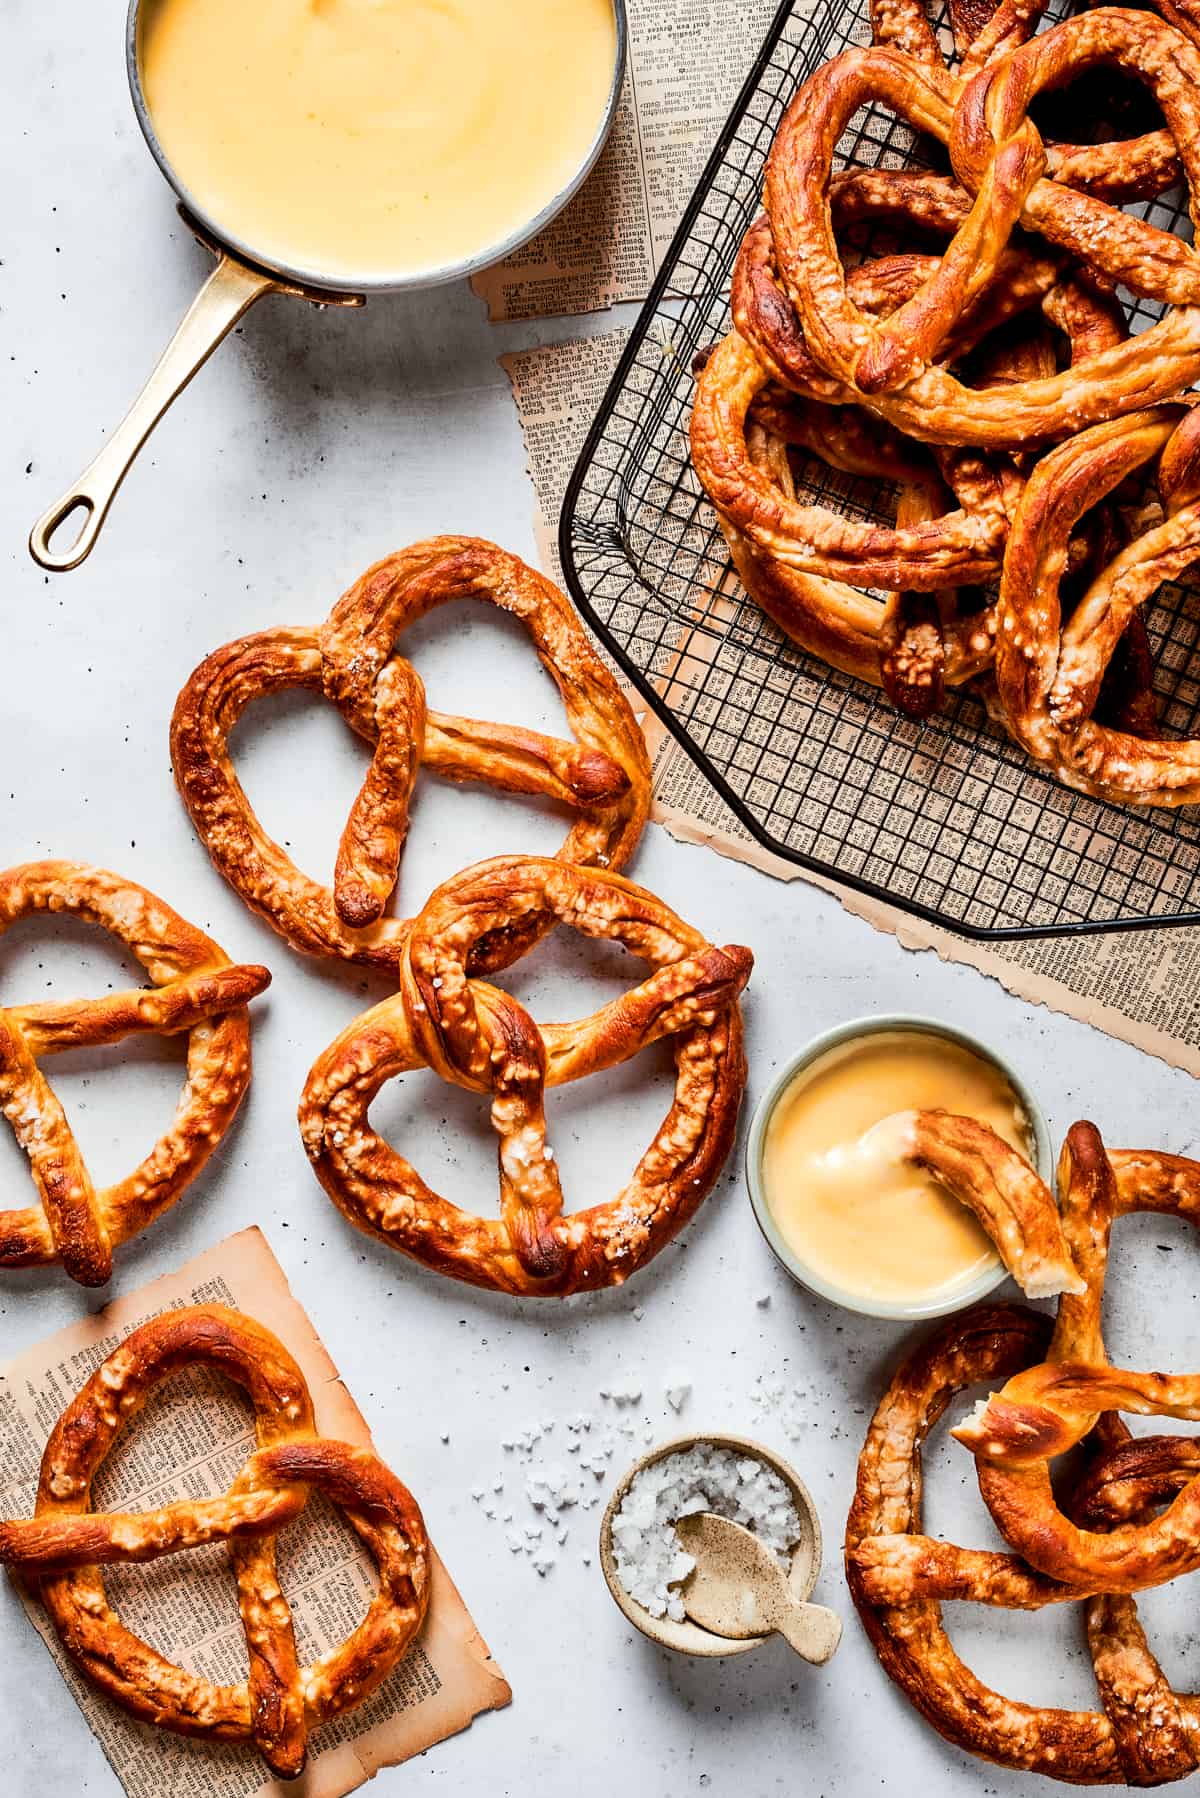 Baked soft pretzels are shown on a rack with cheese sauce alongside.